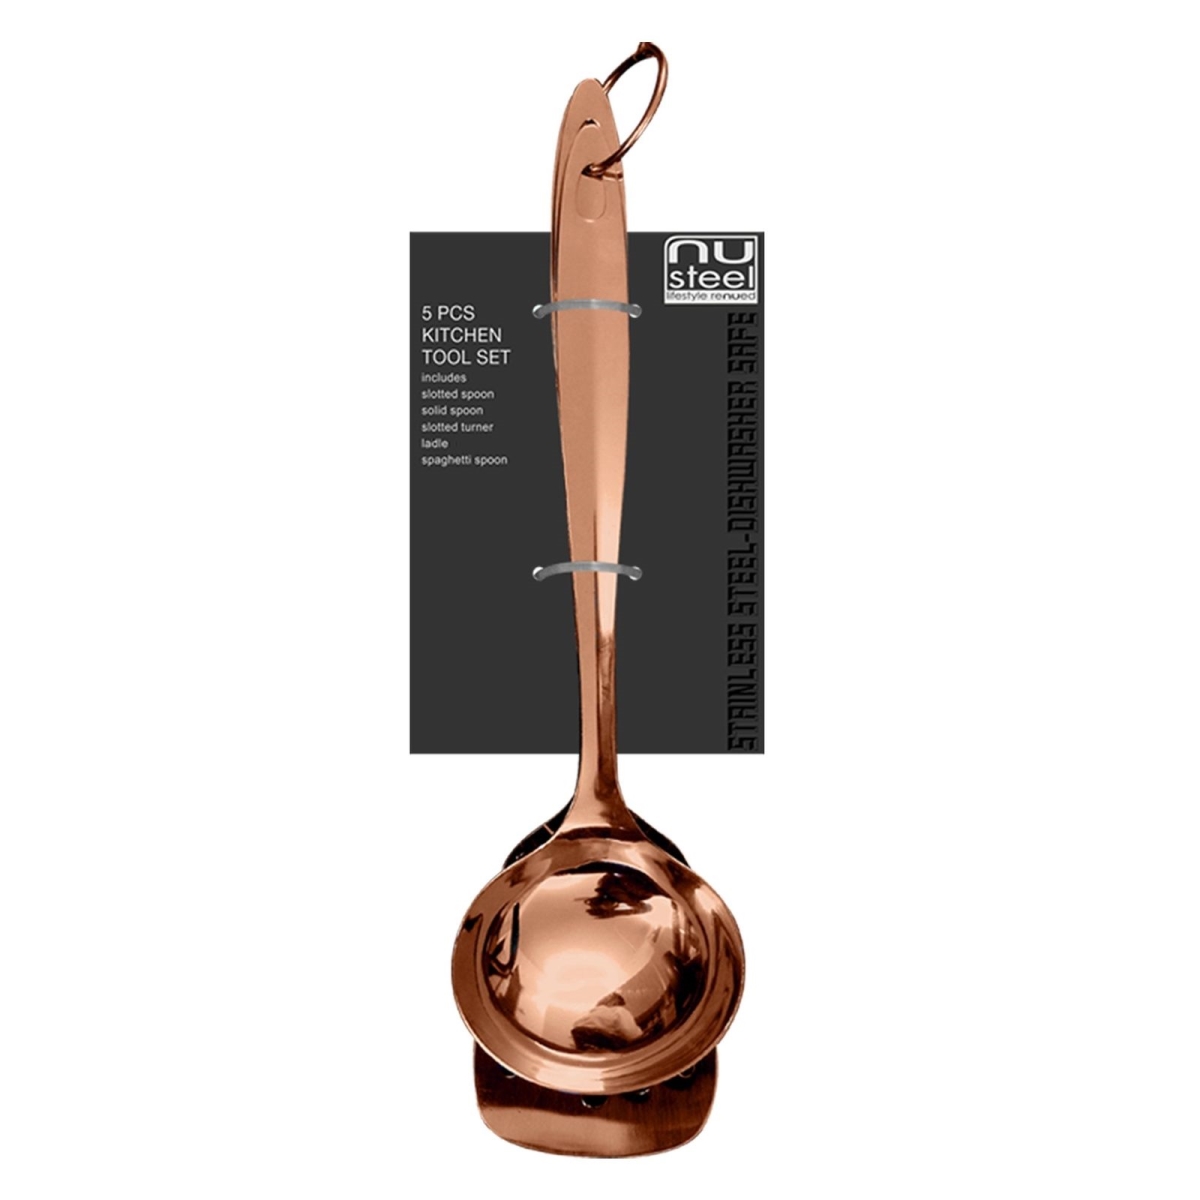 Tg-mm-54 Hammered Mule Lacquered - Copper